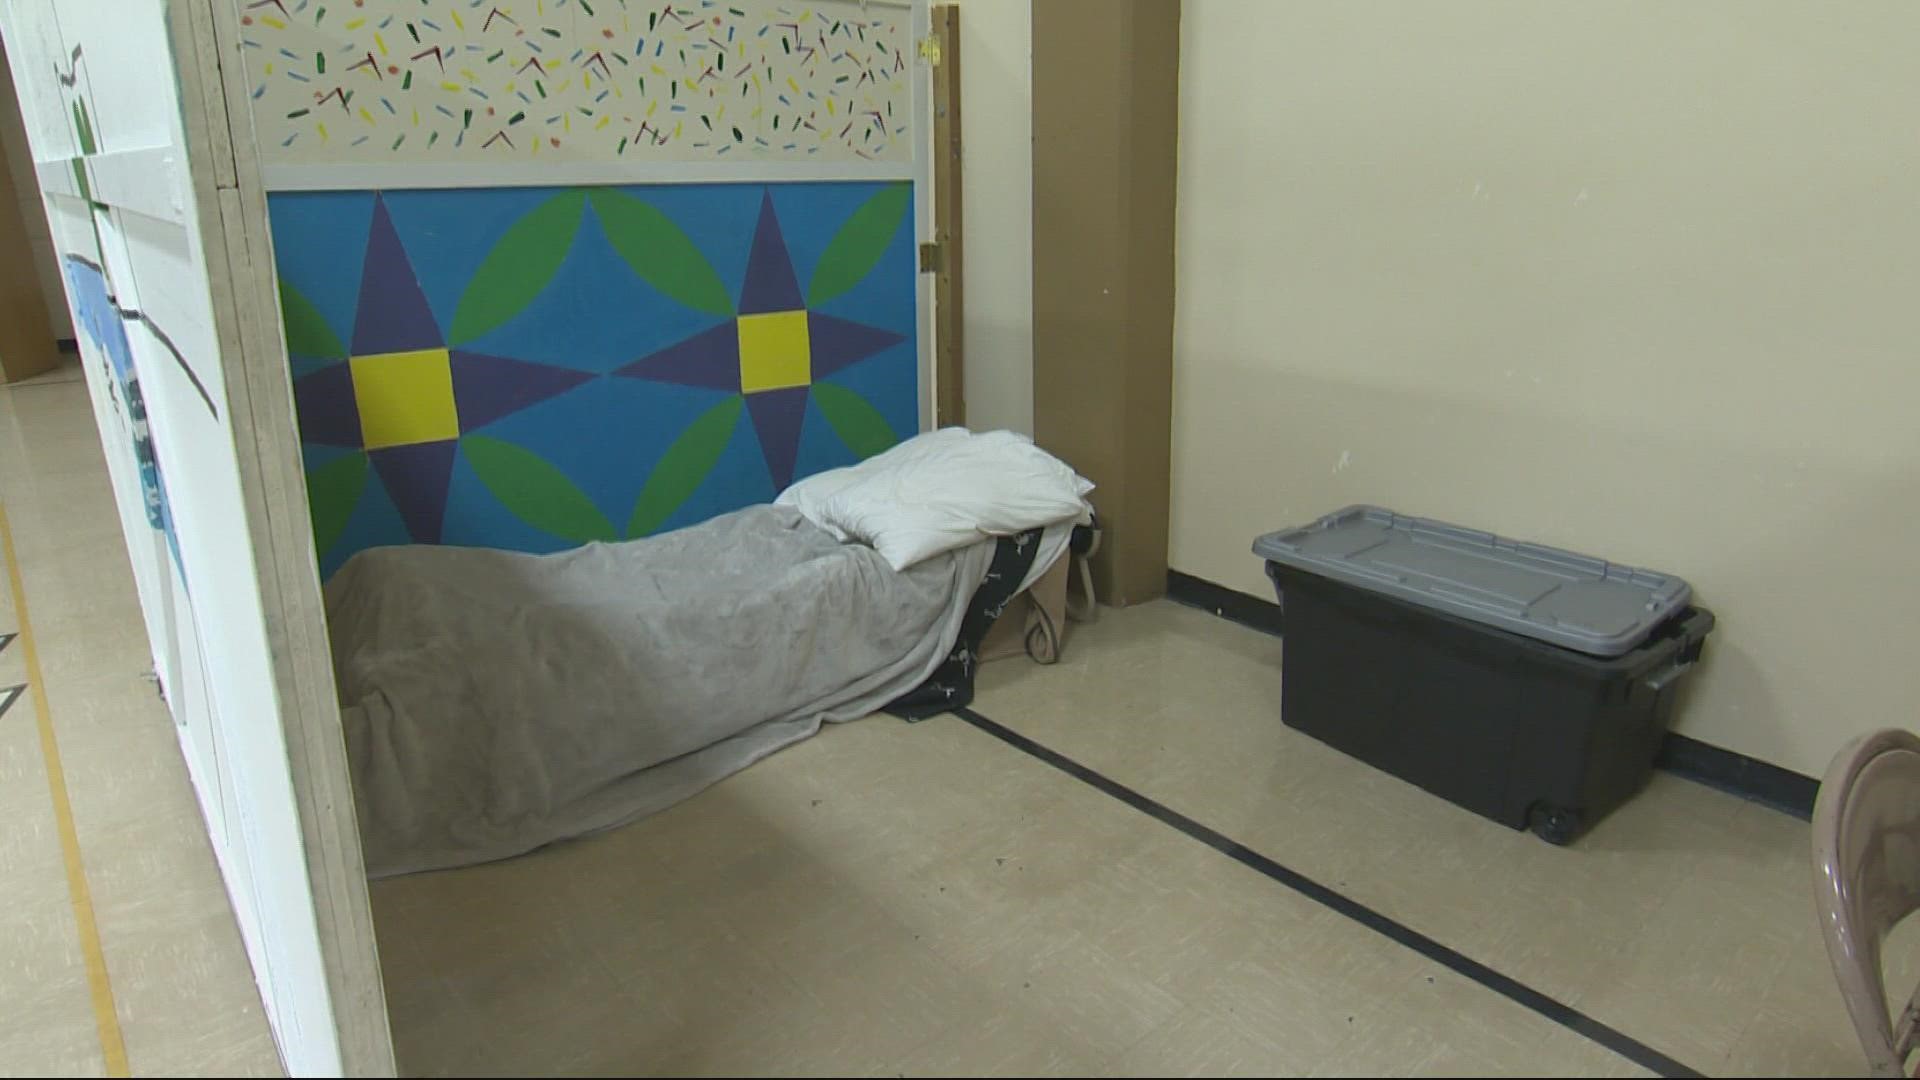 Oregon college students are experiencing homelessness at an all-time high. PSU has partnered with First United Methodist to get those in need a safe place to stay.